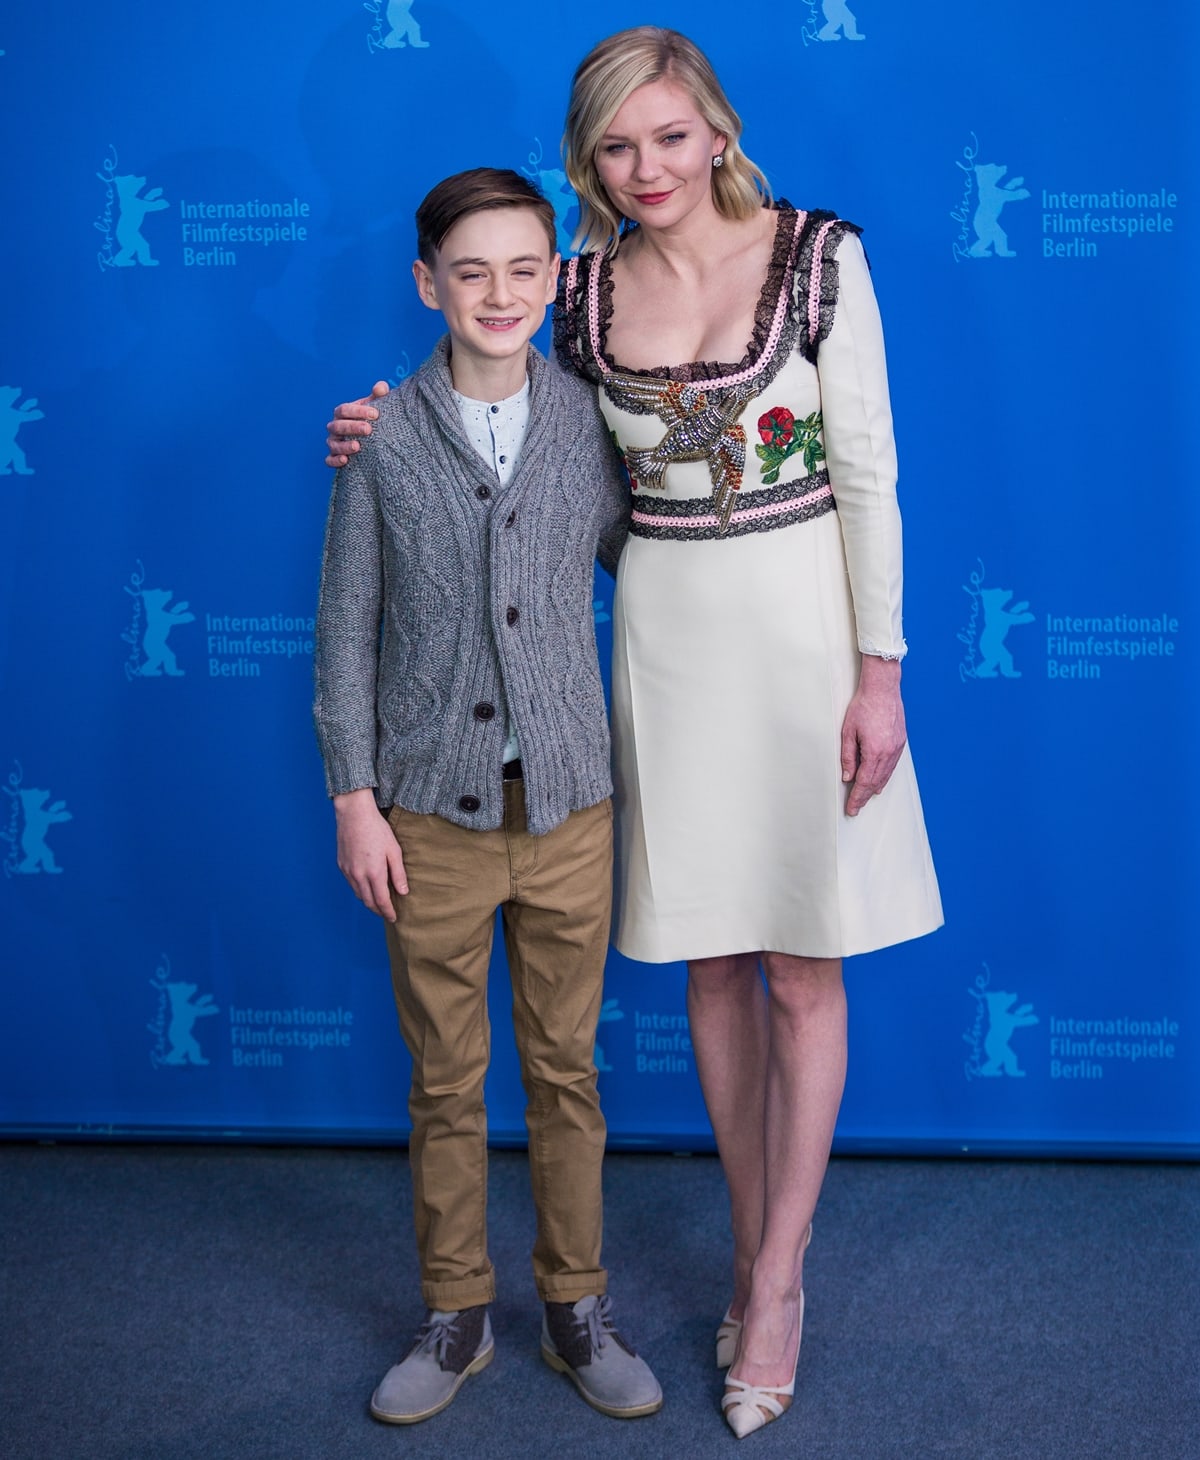 Jaeden Lieberher and Kirsten Dunst attend the 'Midnight Special' photocall during the 66th Berlinale International Film Festival Berlin